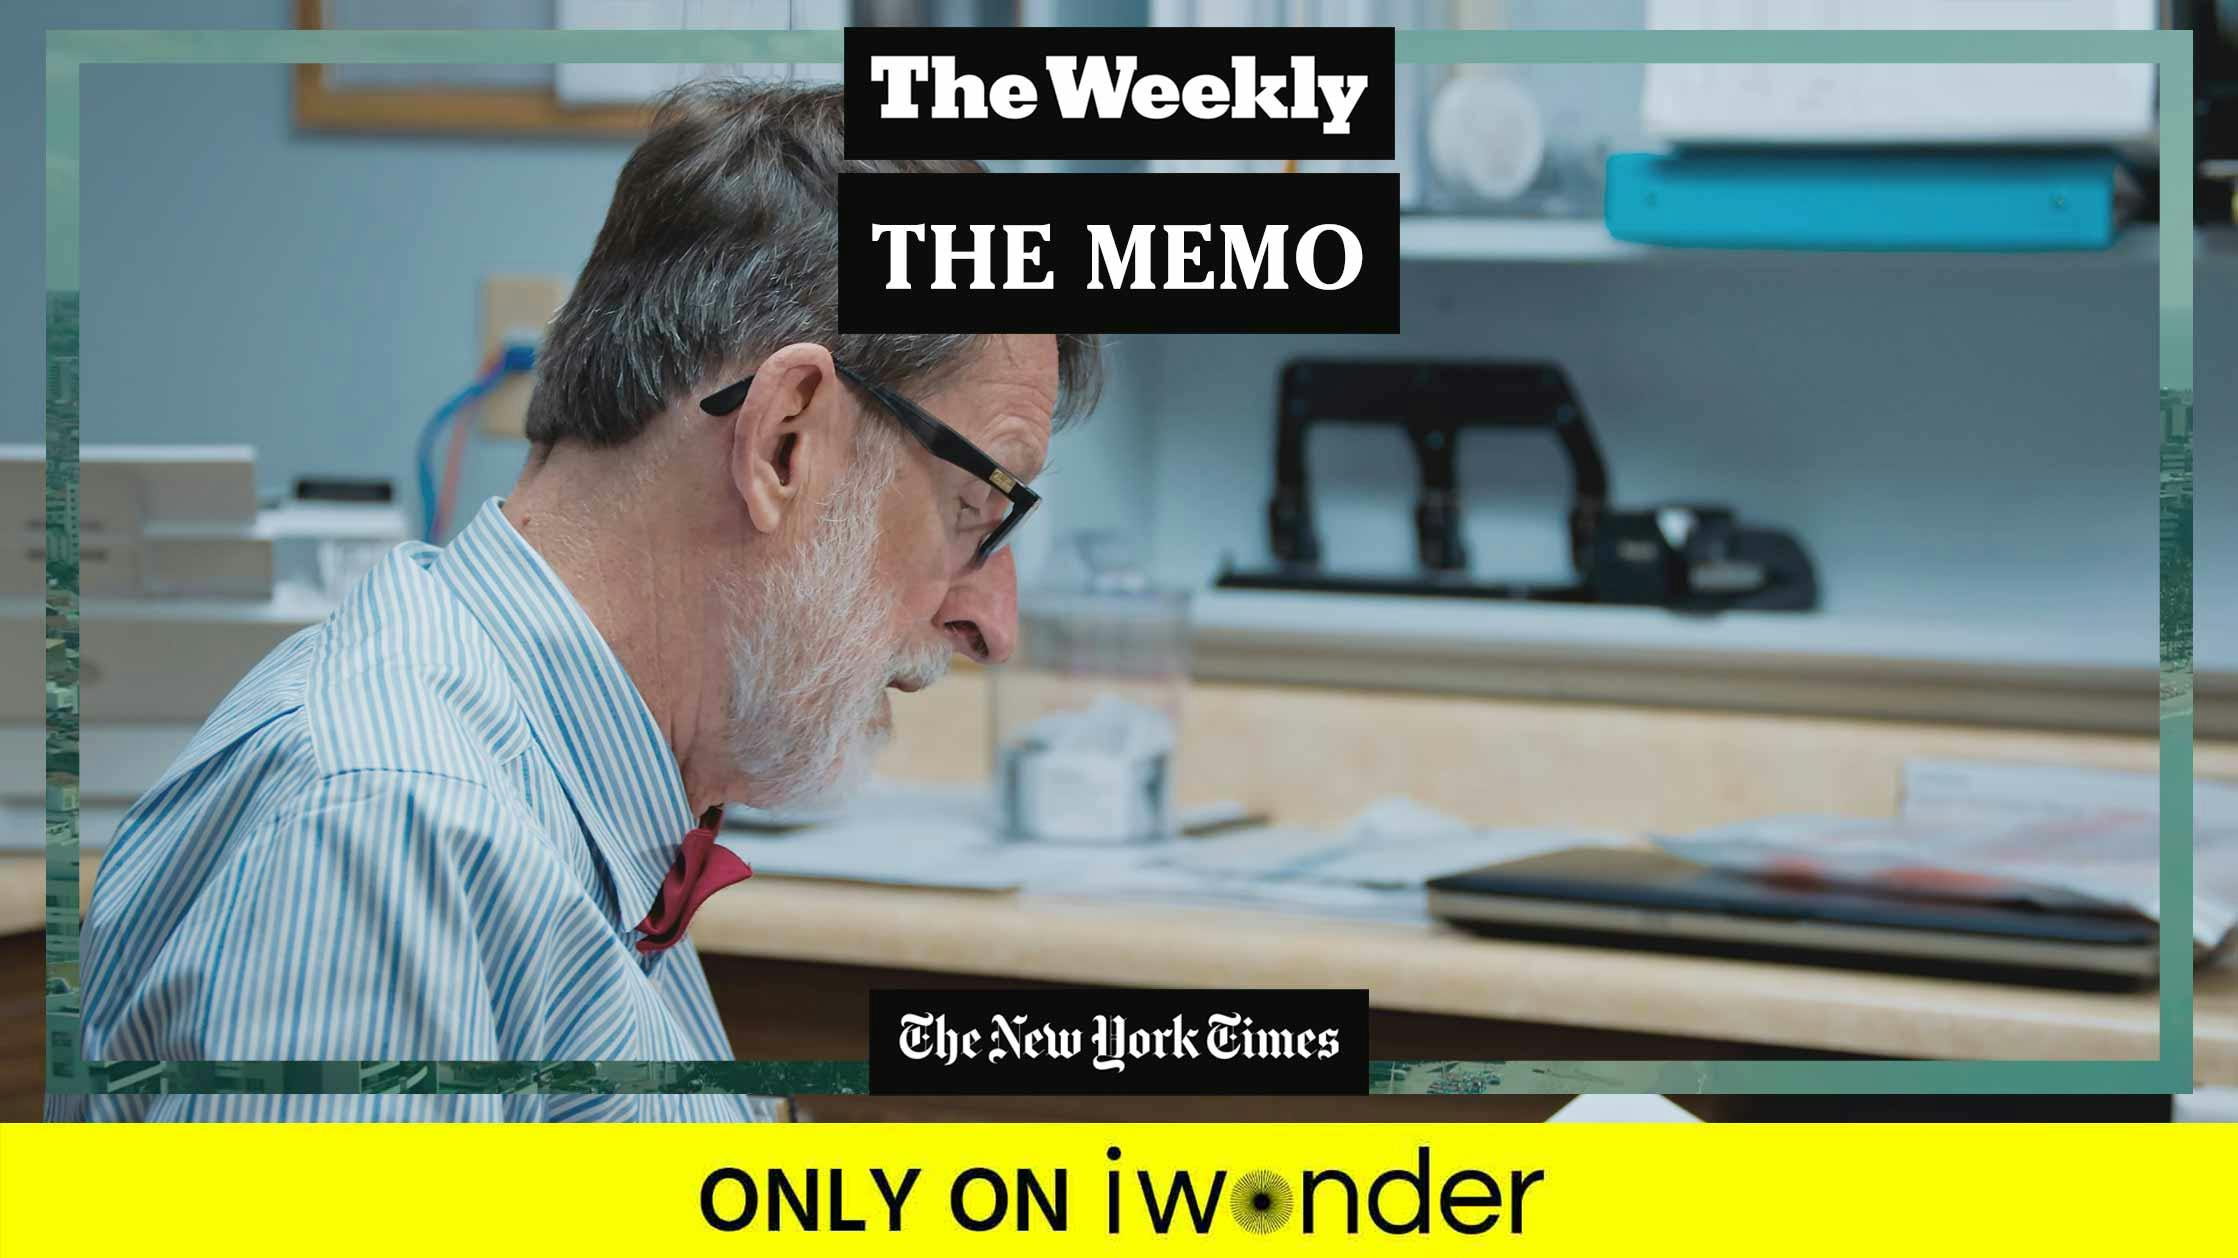 The Weekly: The Memo